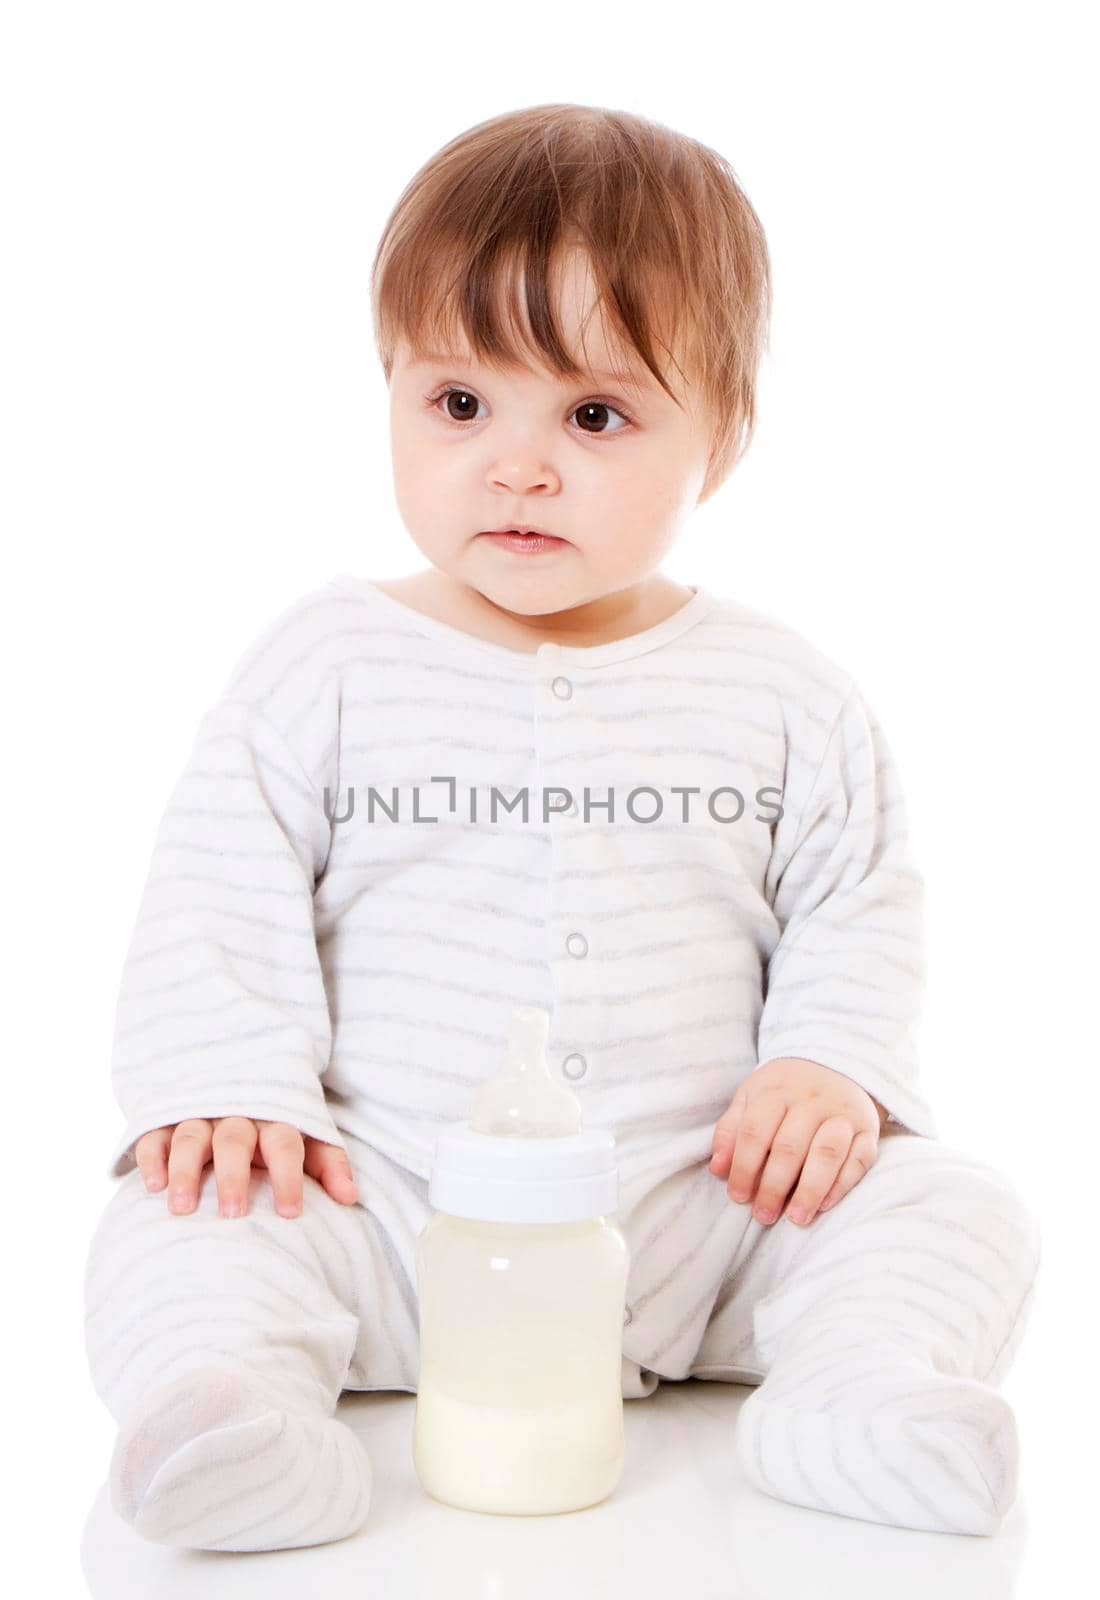 Newborn baby sitting on the floor with the bottle. Isolsted on white.